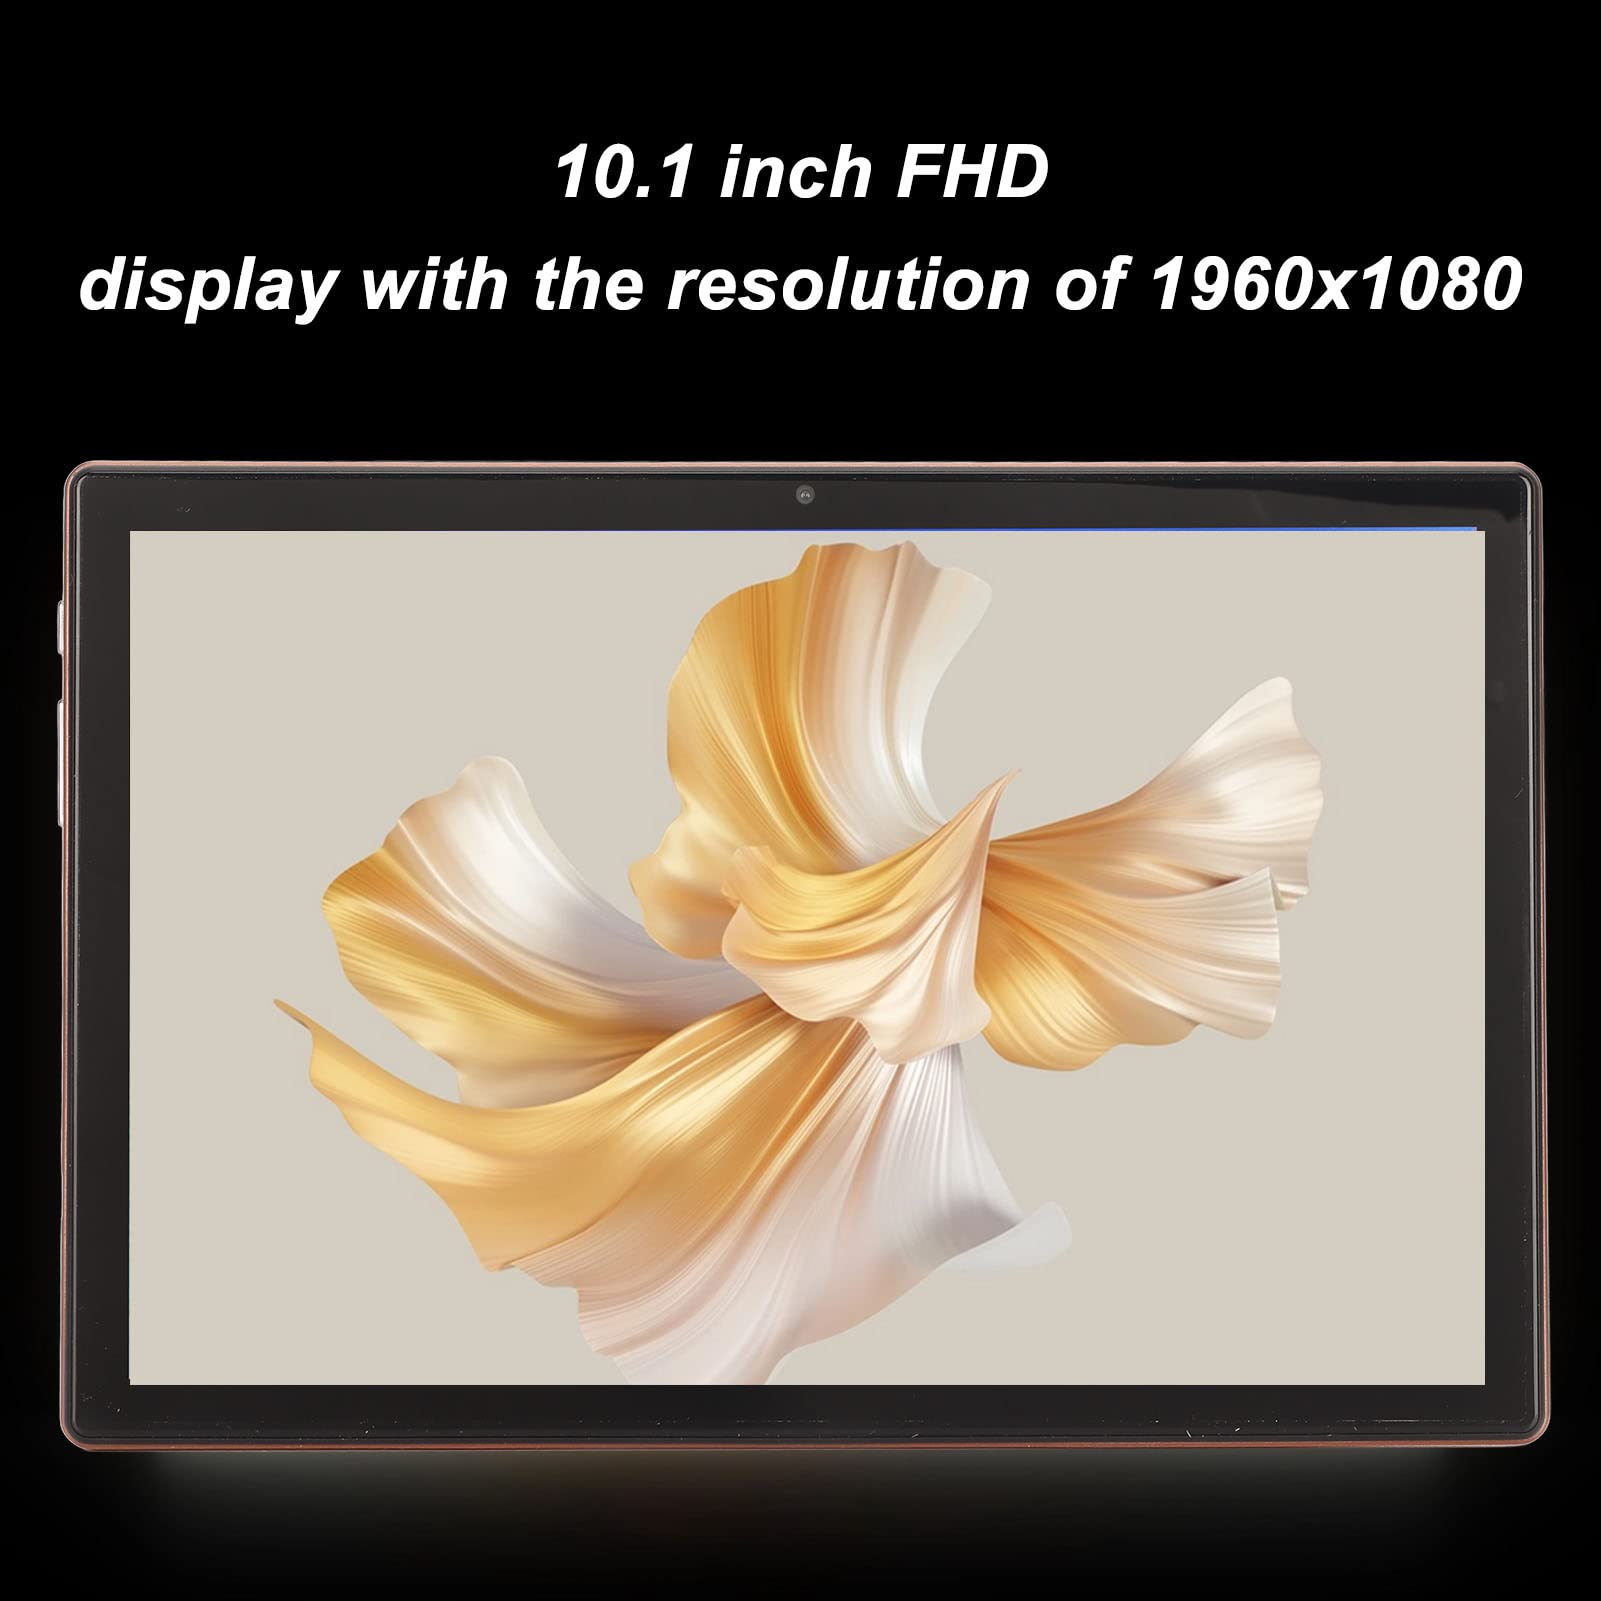 10.1 Inch FHD Tablet, 4G LTE Calling Tablet for Android12, 8GB RAM 256GB ROM, Support 5G WiFi Dual Band, Octa Core 7000mAh Tablet PC with Dual Camera for Daily Life